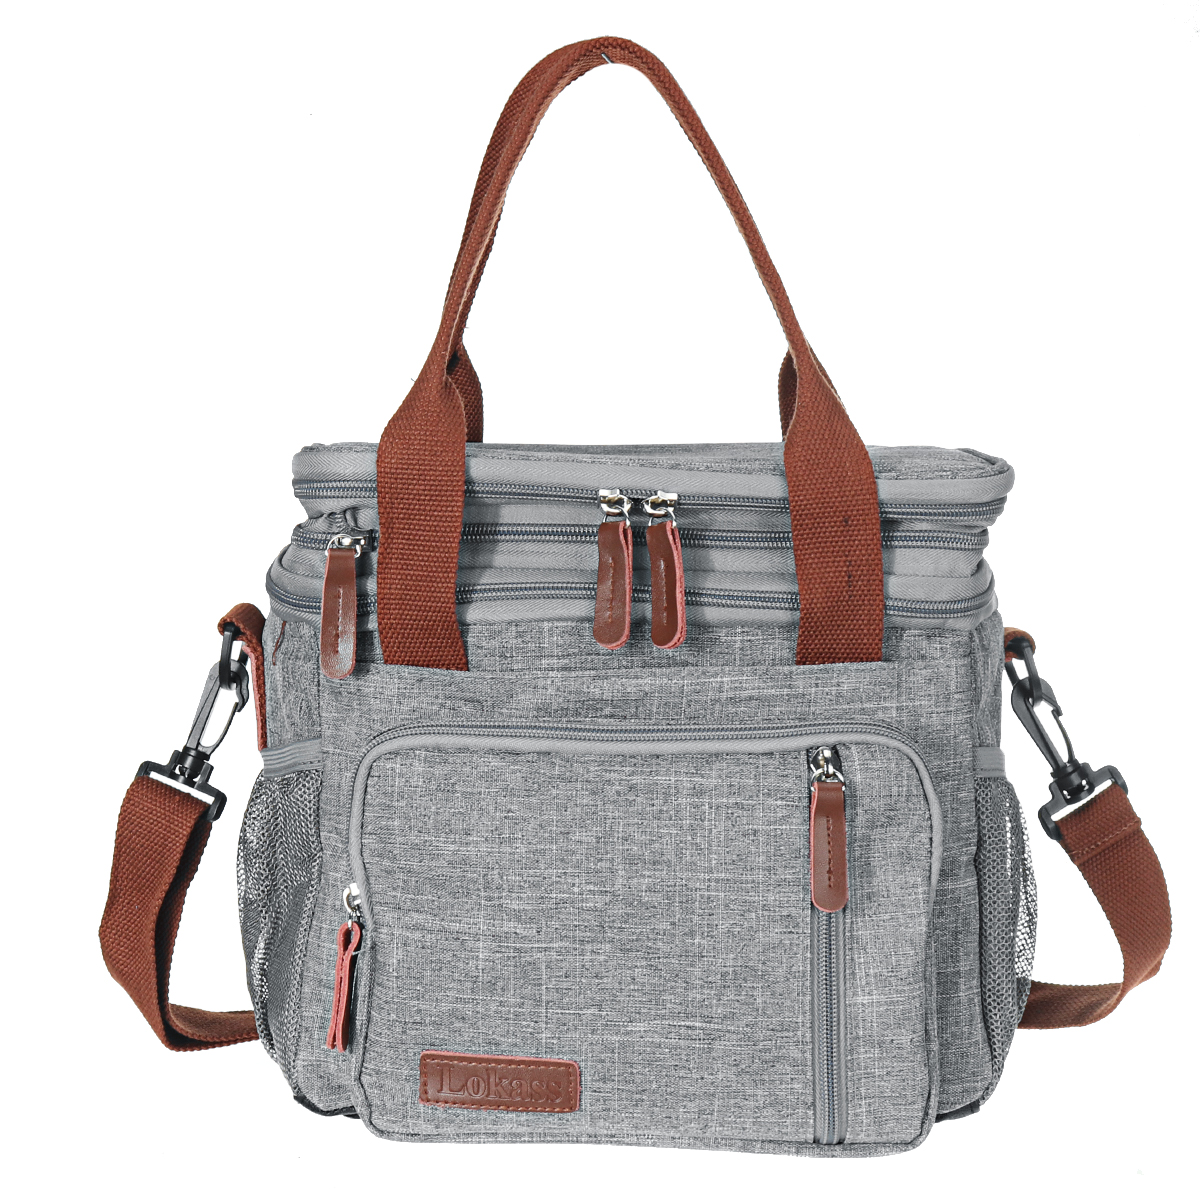 Expandable-Large-Capacity-with-Multiple-Pockets-Leak-proof-Drinks-Lunch-Insulated-Bag-Picnic-Storage-1863622-2